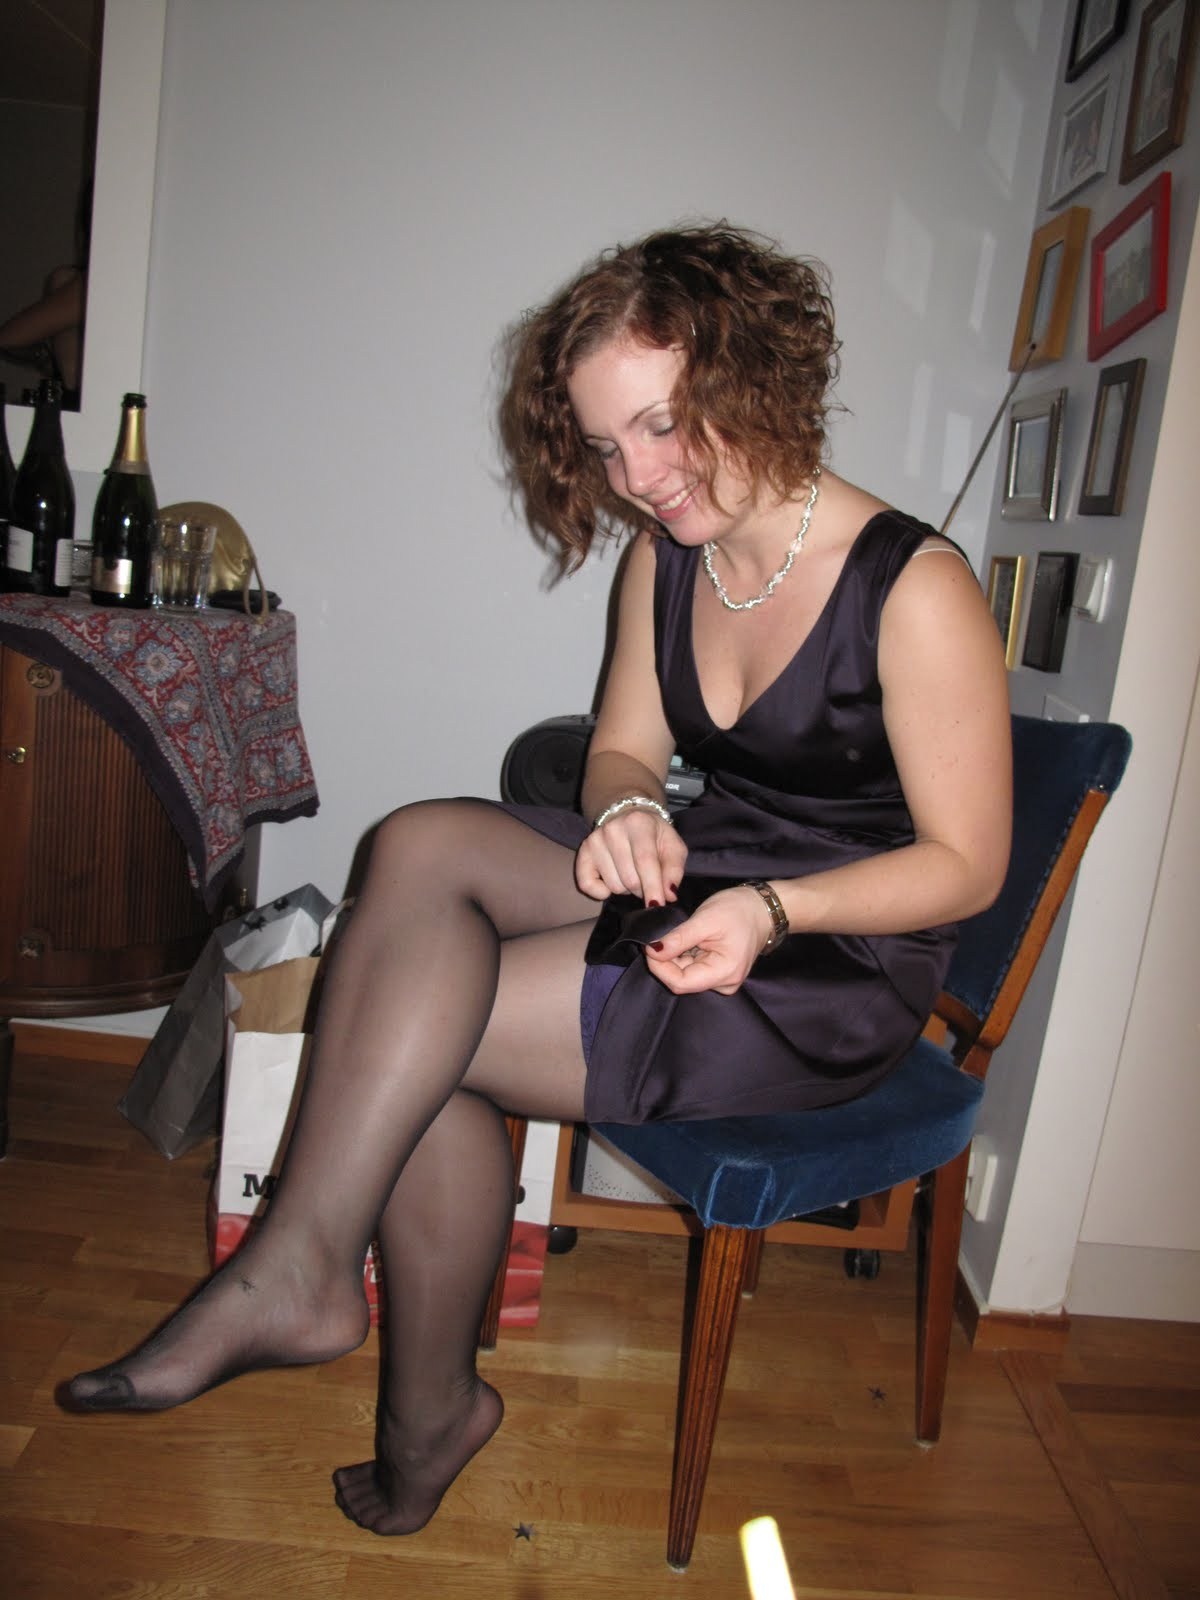 Erotica from Women Over 40 in Pantyhose (63 photos) picture